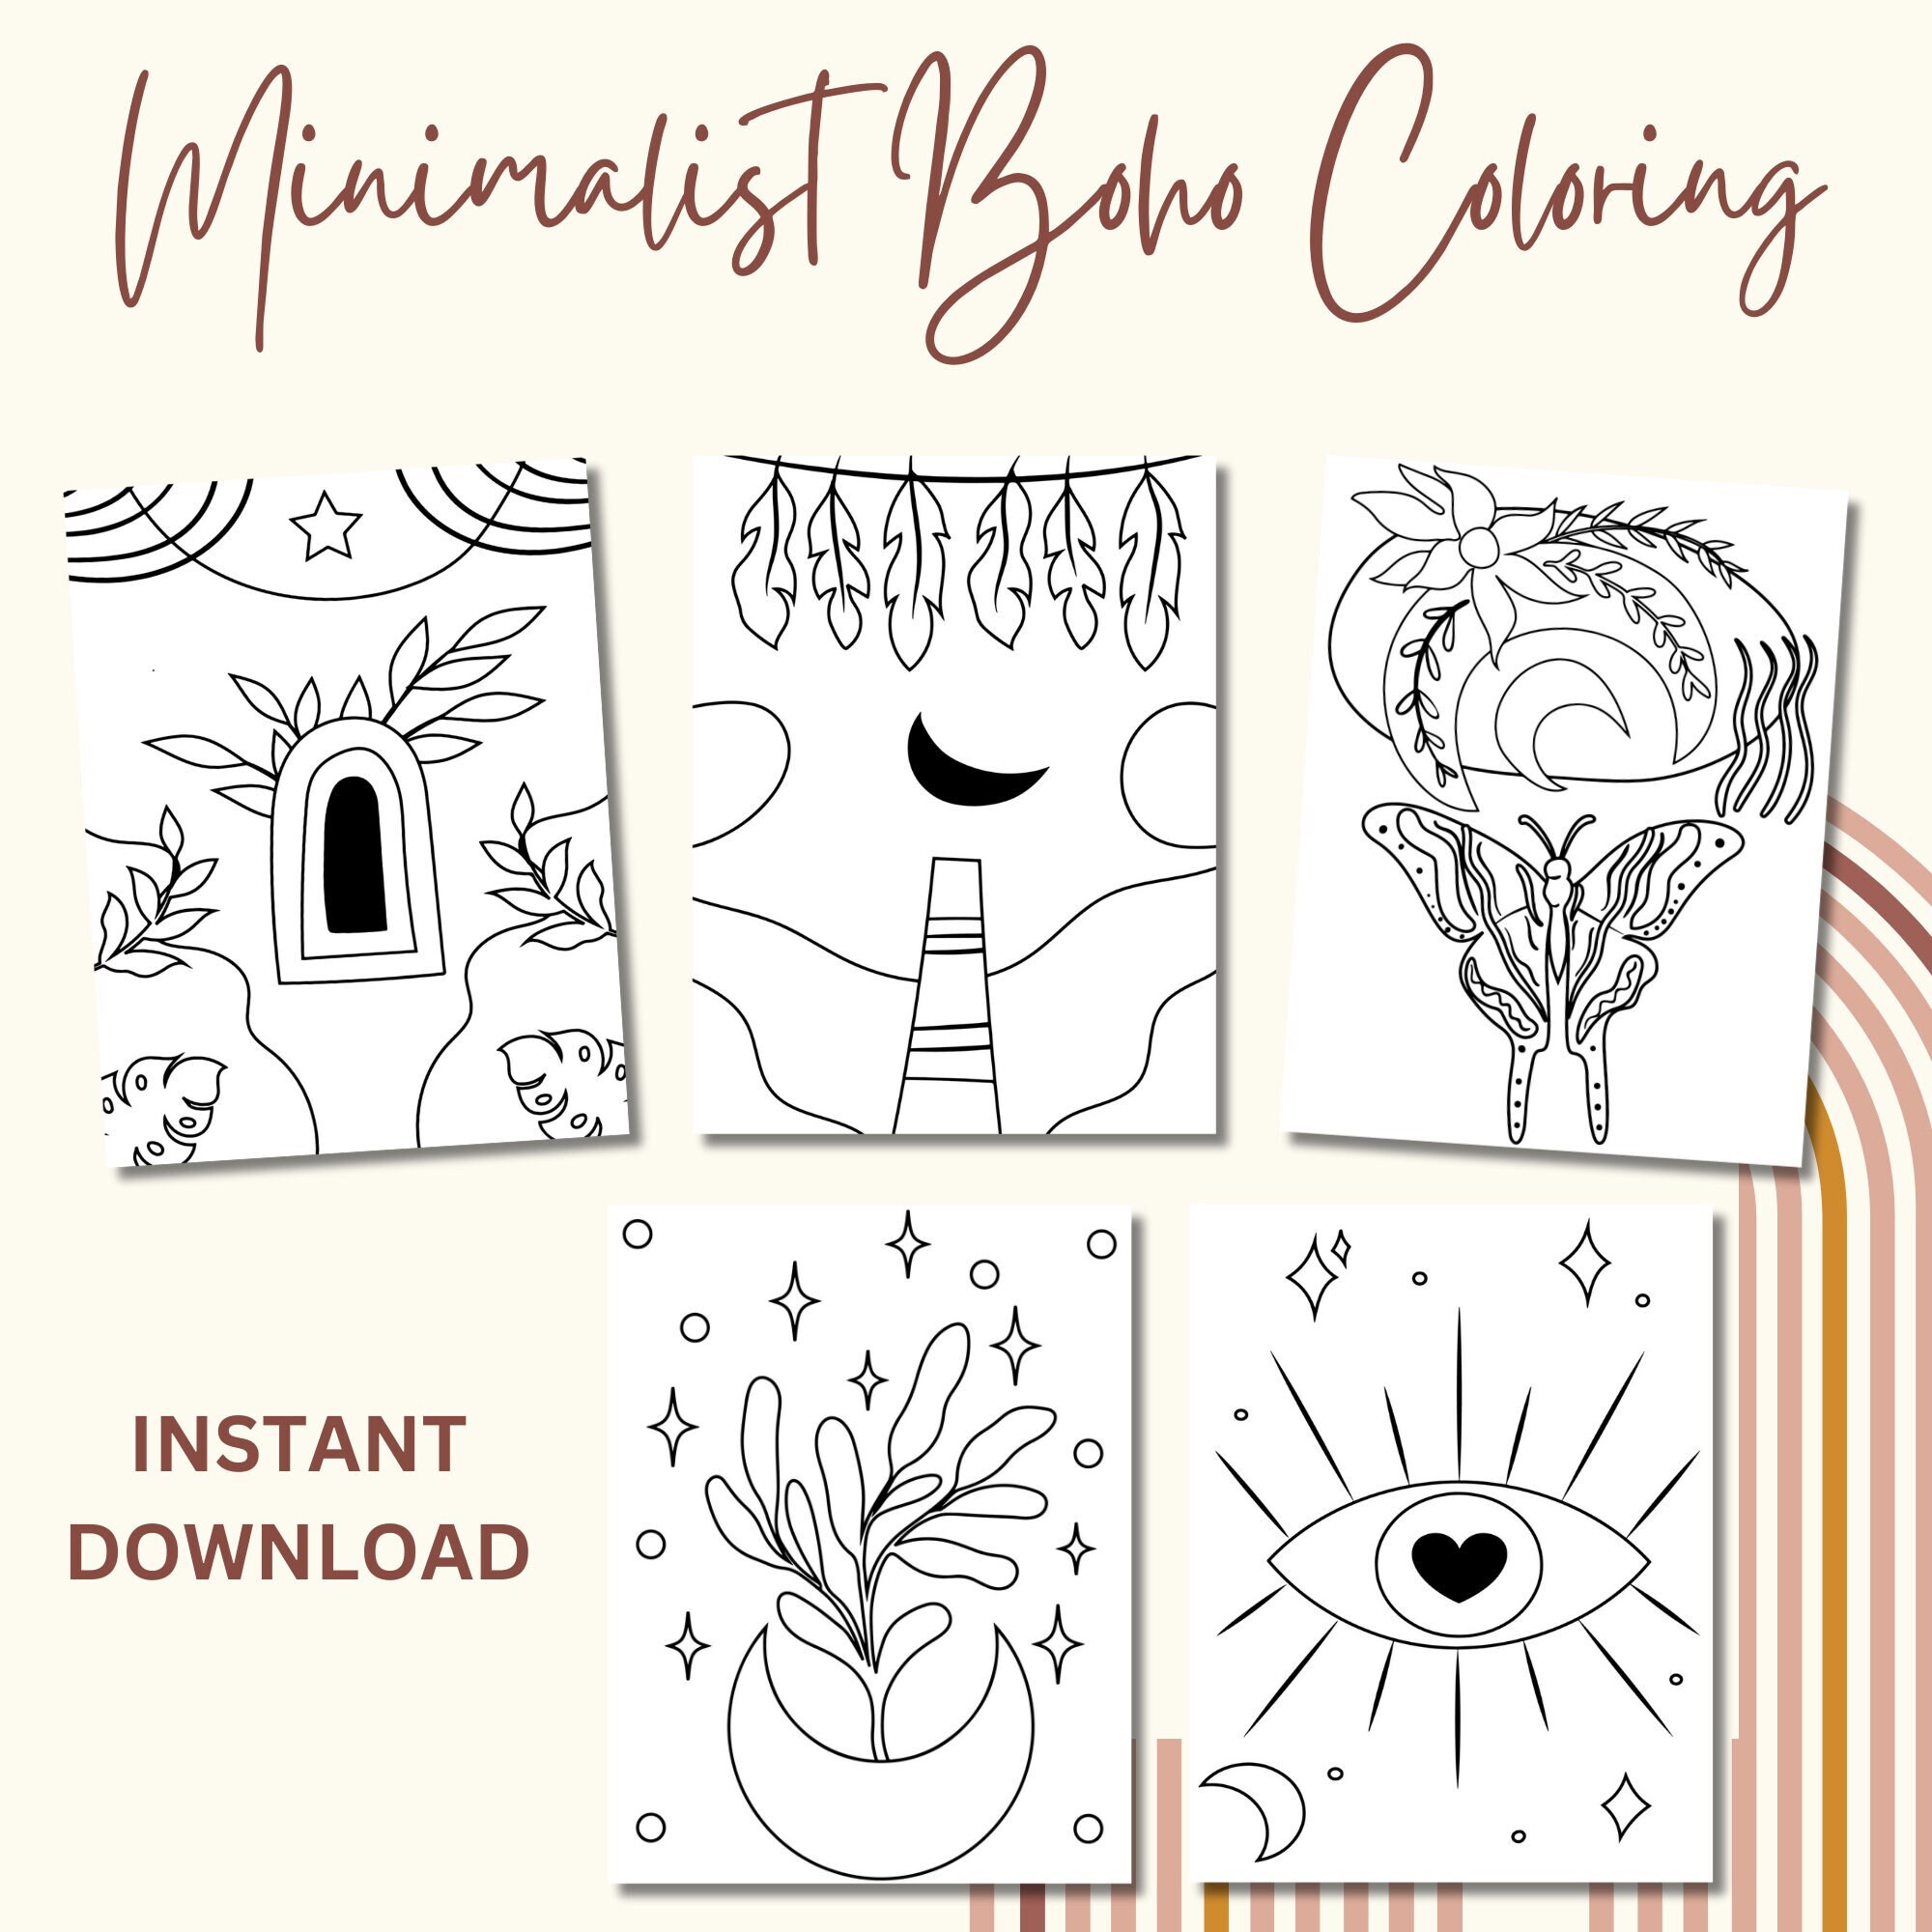 Minimalist Boho Coloring Book : For Teens, Adults, Aesthetic Colo